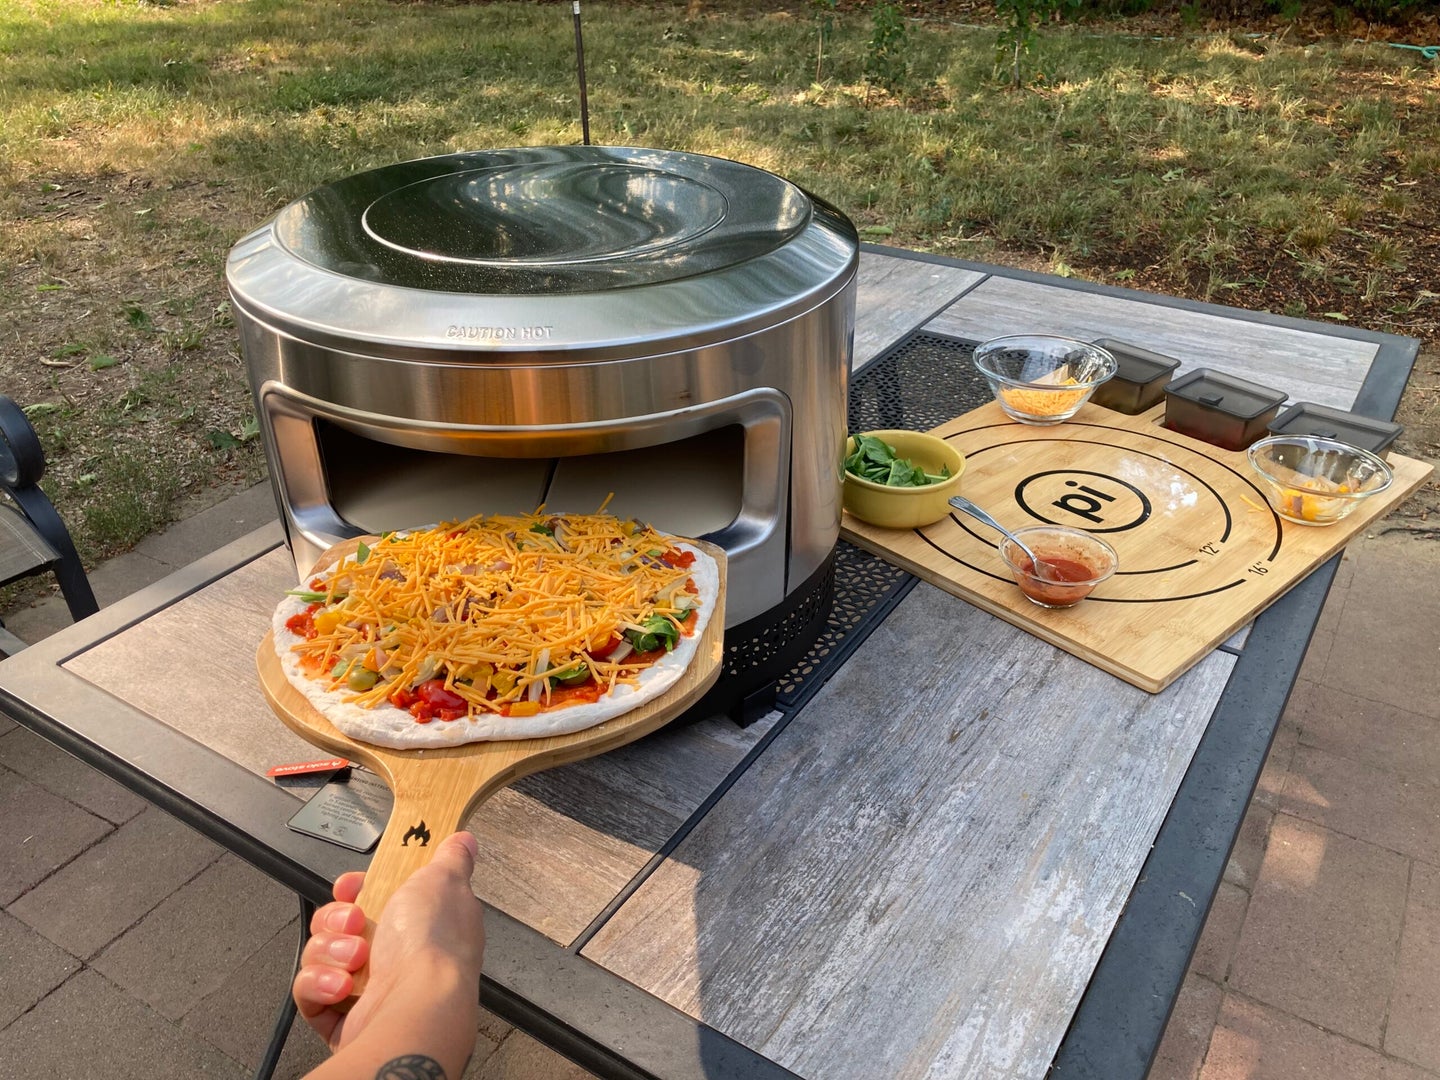 https://www.fieldandstream.com/uploads/2023/07/19/solo-stove-pi-prime-featured-image-scaled.jpg?auto=webp&width=1440&height=1080